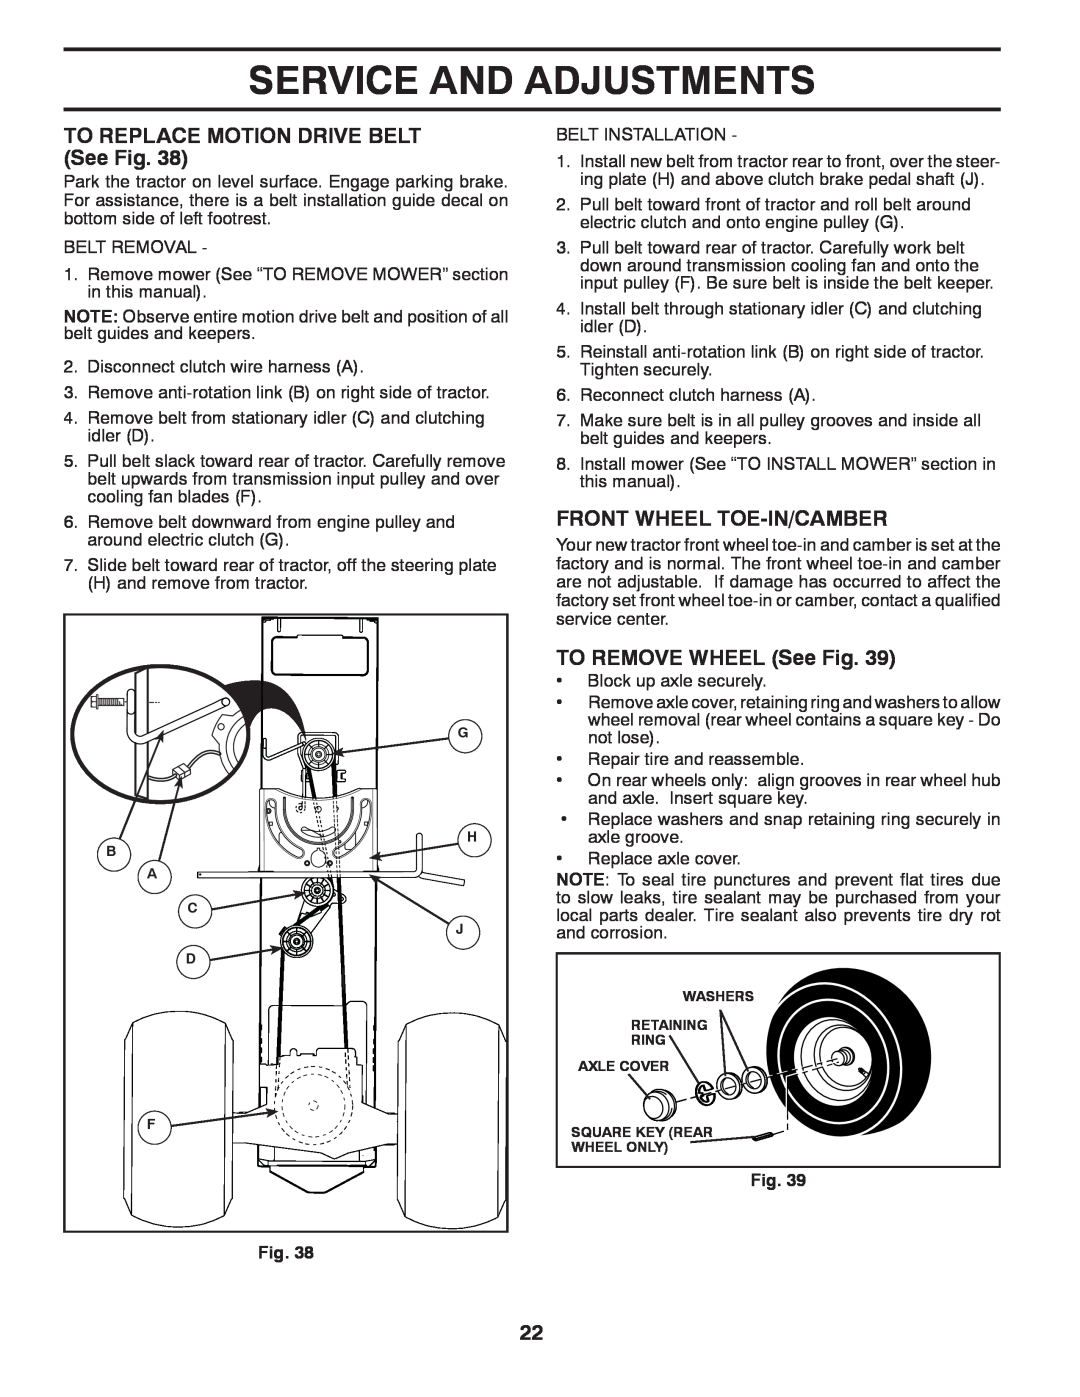 Husqvarna GTH27V52LS owner manual TO REPLACE MOTION DRIVE BELT See Fig, Front Wheel Toe-In/Camber, TO REMOVE WHEEL See Fig 